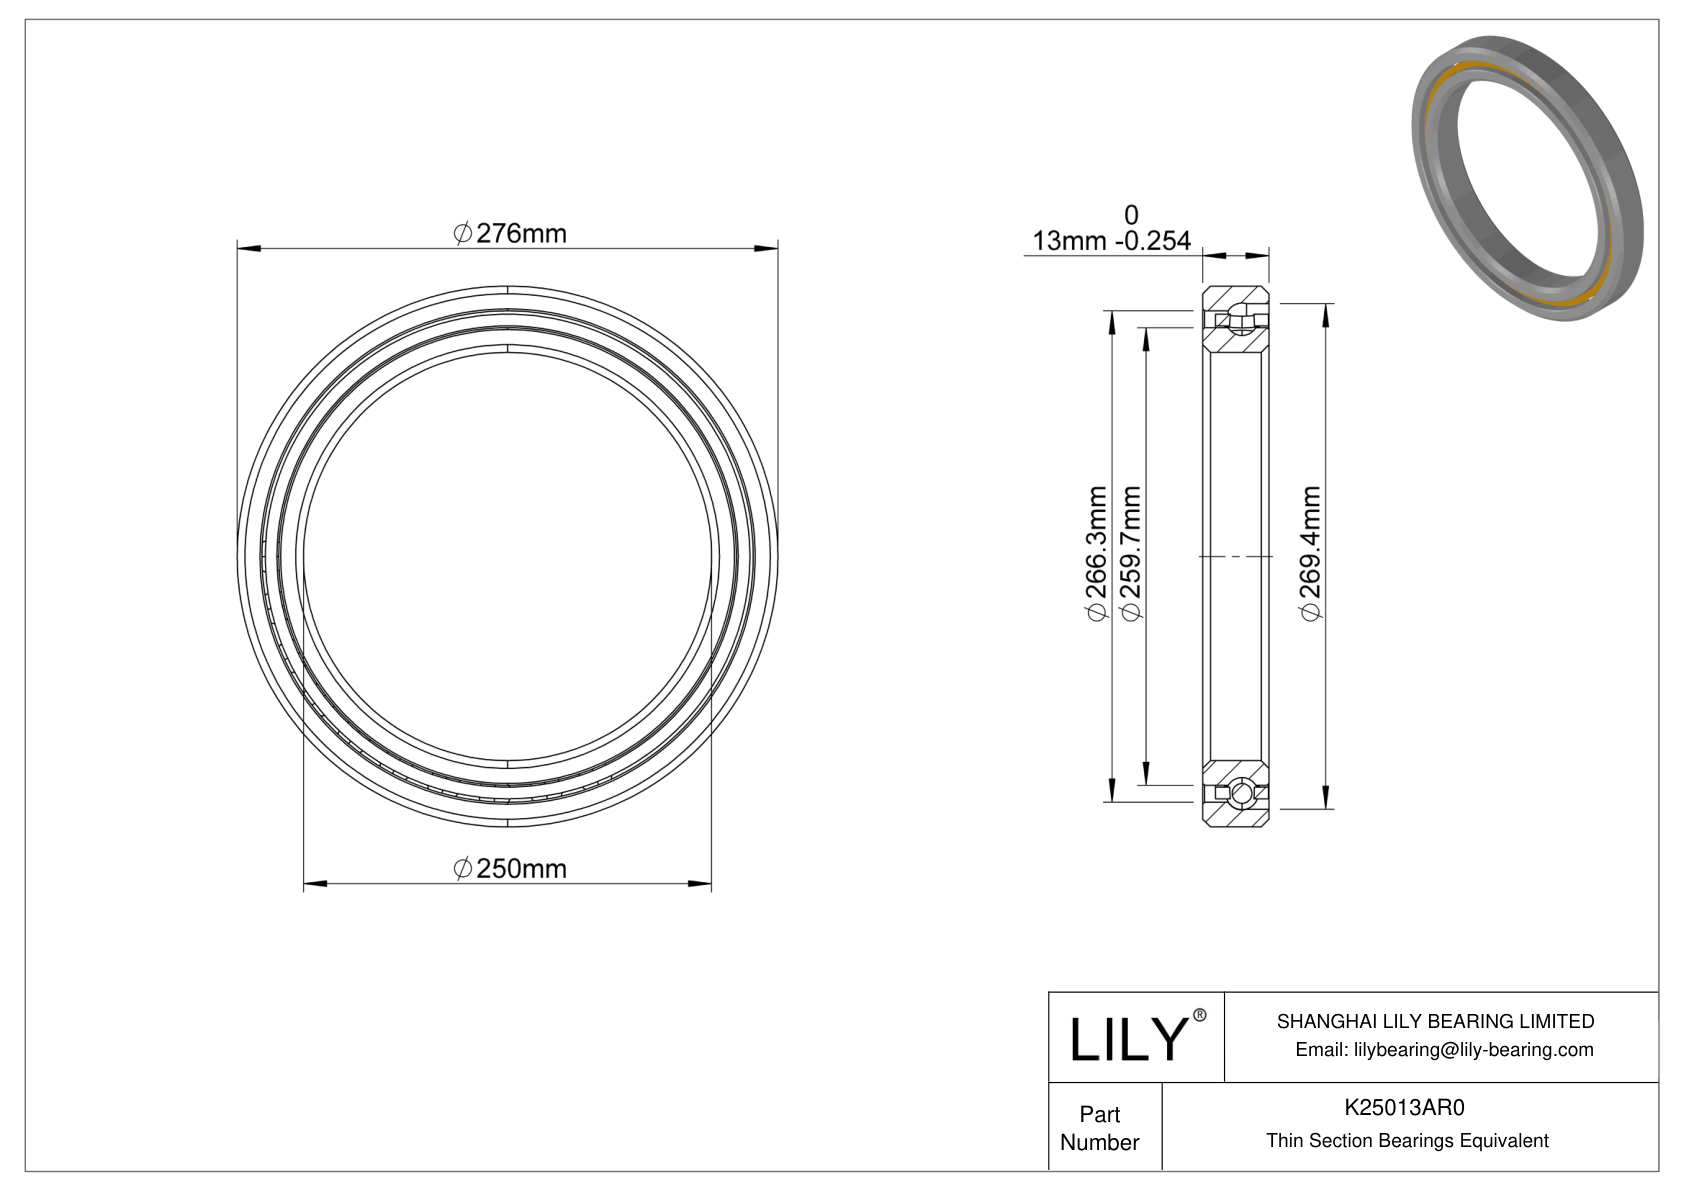 K25013AR0 Constant Section (CS) Bearings cad drawing